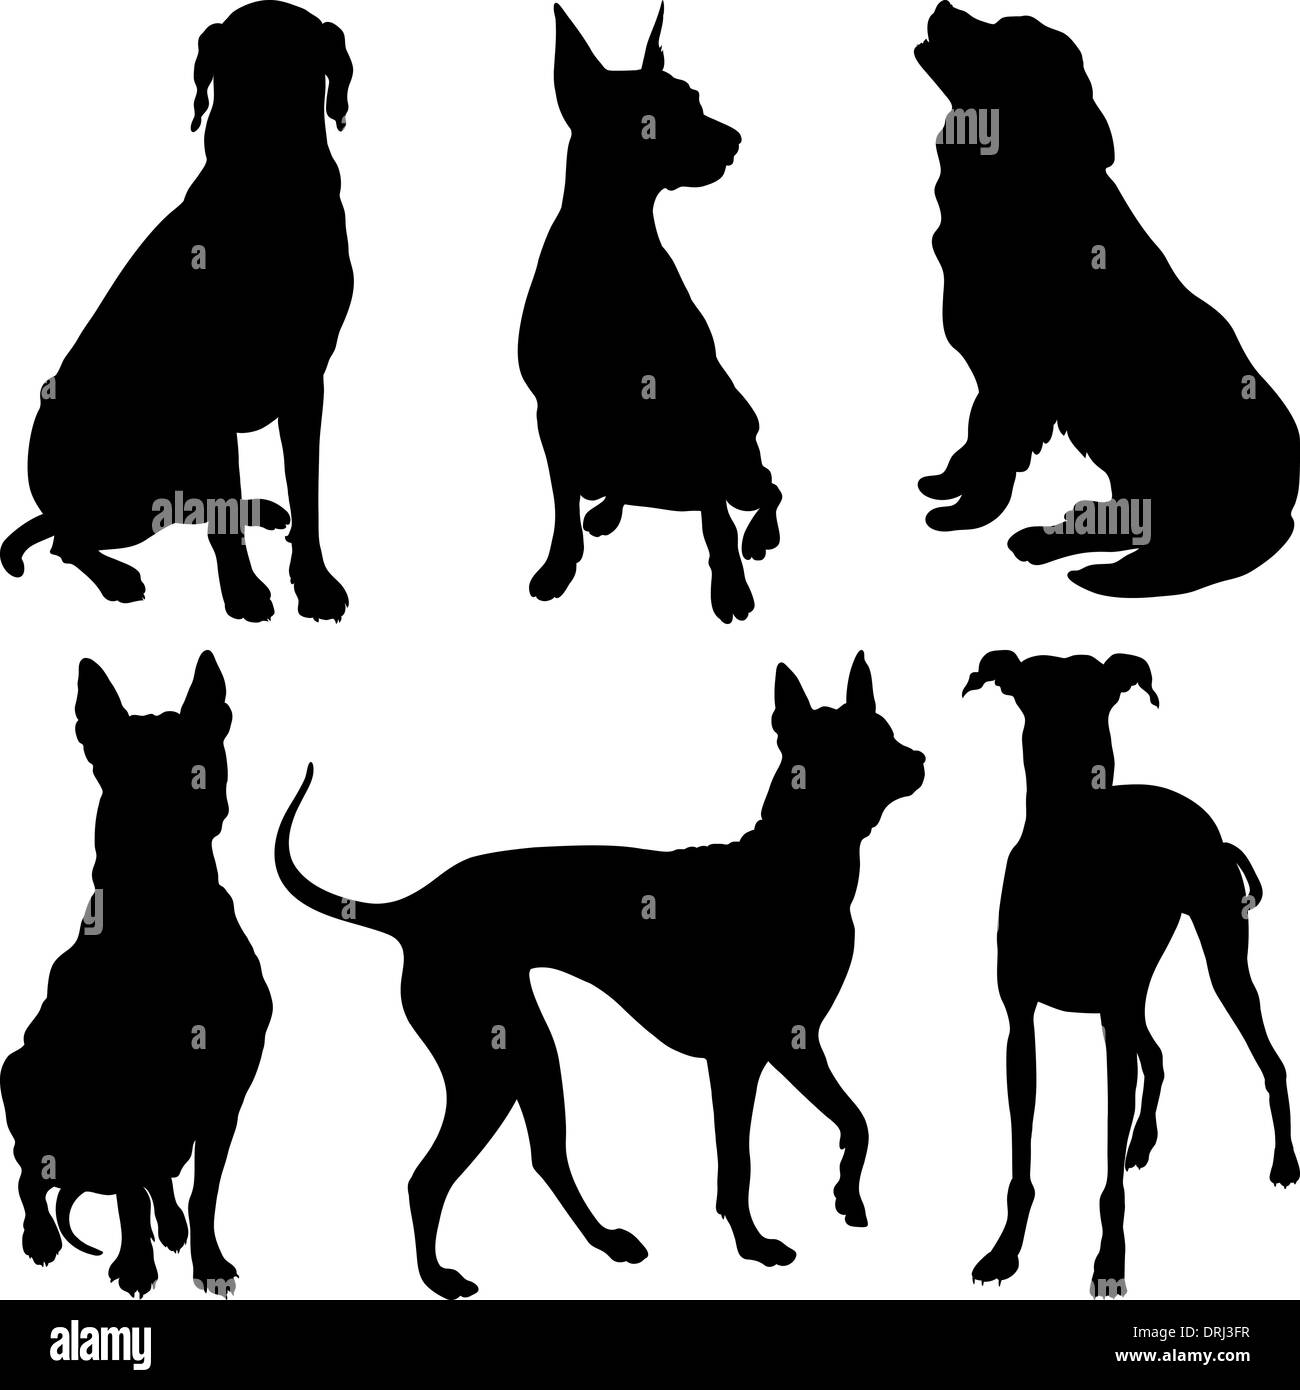 set of silhouettes of dogs pinscher, ridgeback hound, pointer, Newfoundland, Dalmatians breed in various poses Stock Photo